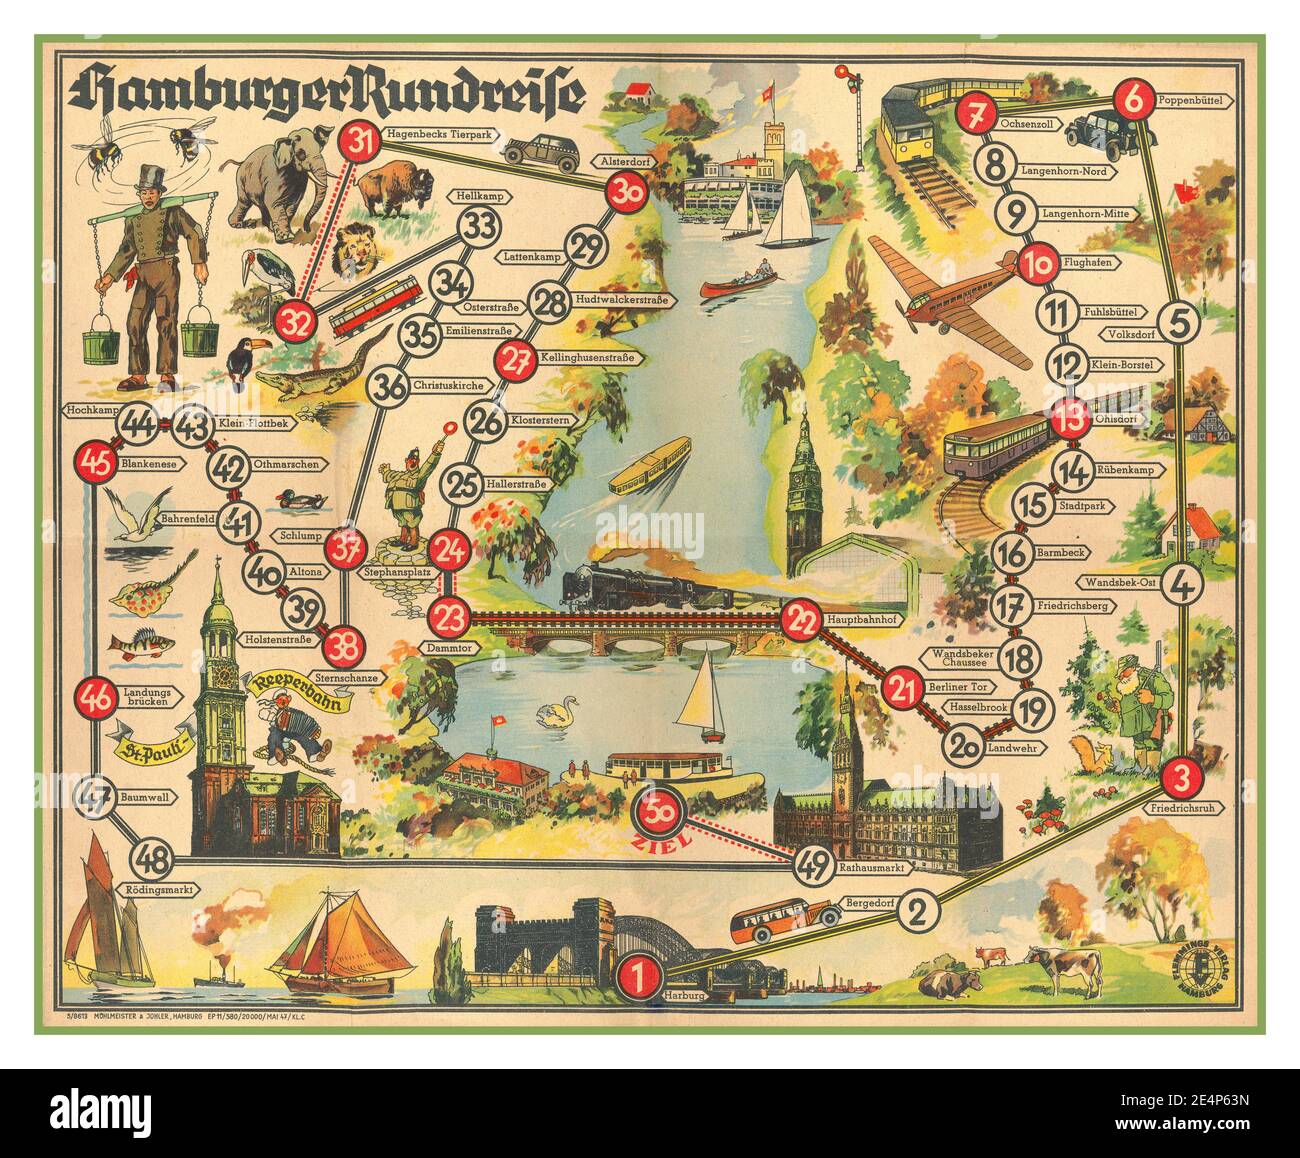 Post War Germany 1947 Pictorial tourist map of Hamburg, Germany, published in 1947. Hamburg had been very heavily damaged by allied bombing in the war, and much of the city was not rebuilt for decades. Many of the 50 tourist 'sites' identified on this map are simply rail stops and streets; as to the others, it's not clear exactly what could be seen and visited in 1947. One site prominently featured, with an image of a celebrating sailor, is St. Pauli - Reeperbahn, Hamburg's famous red light district. Poster issued in the period shortly after World War II as part of efforts to rebuild tourism. Stock Photo